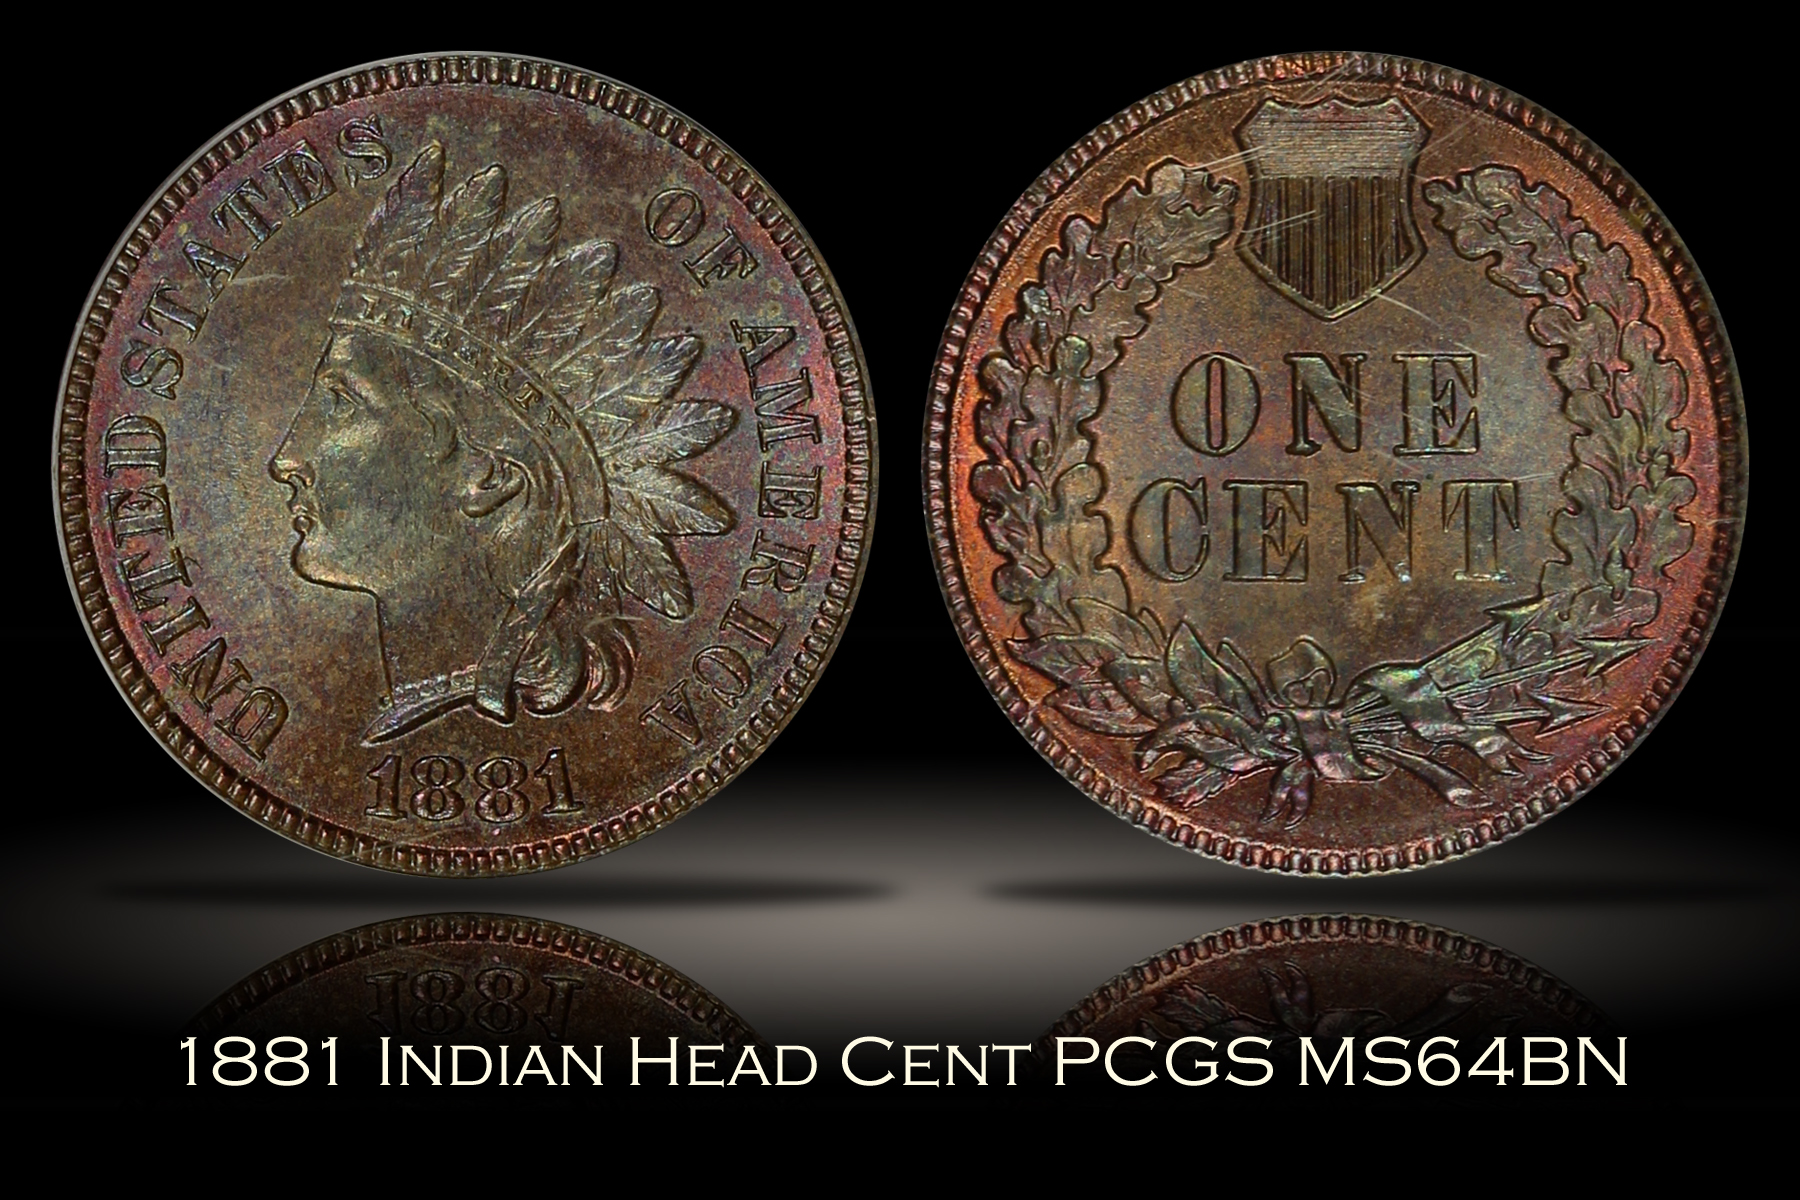 1881 Indian Head Cent PCGS MS64BN